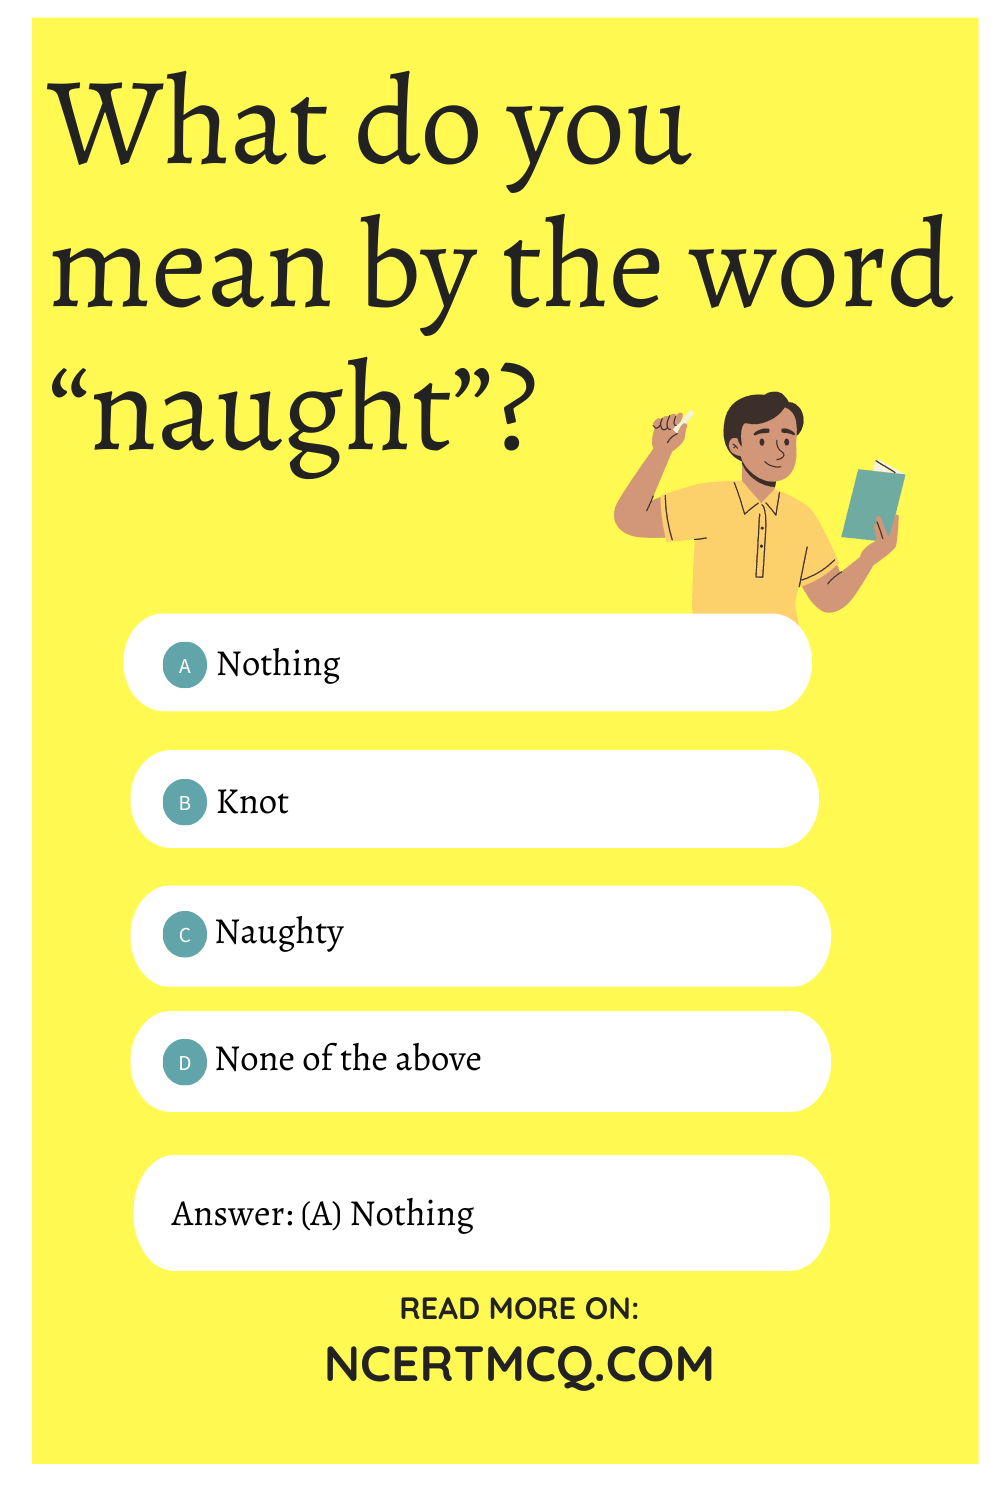 What do you mean by the word “naught”?